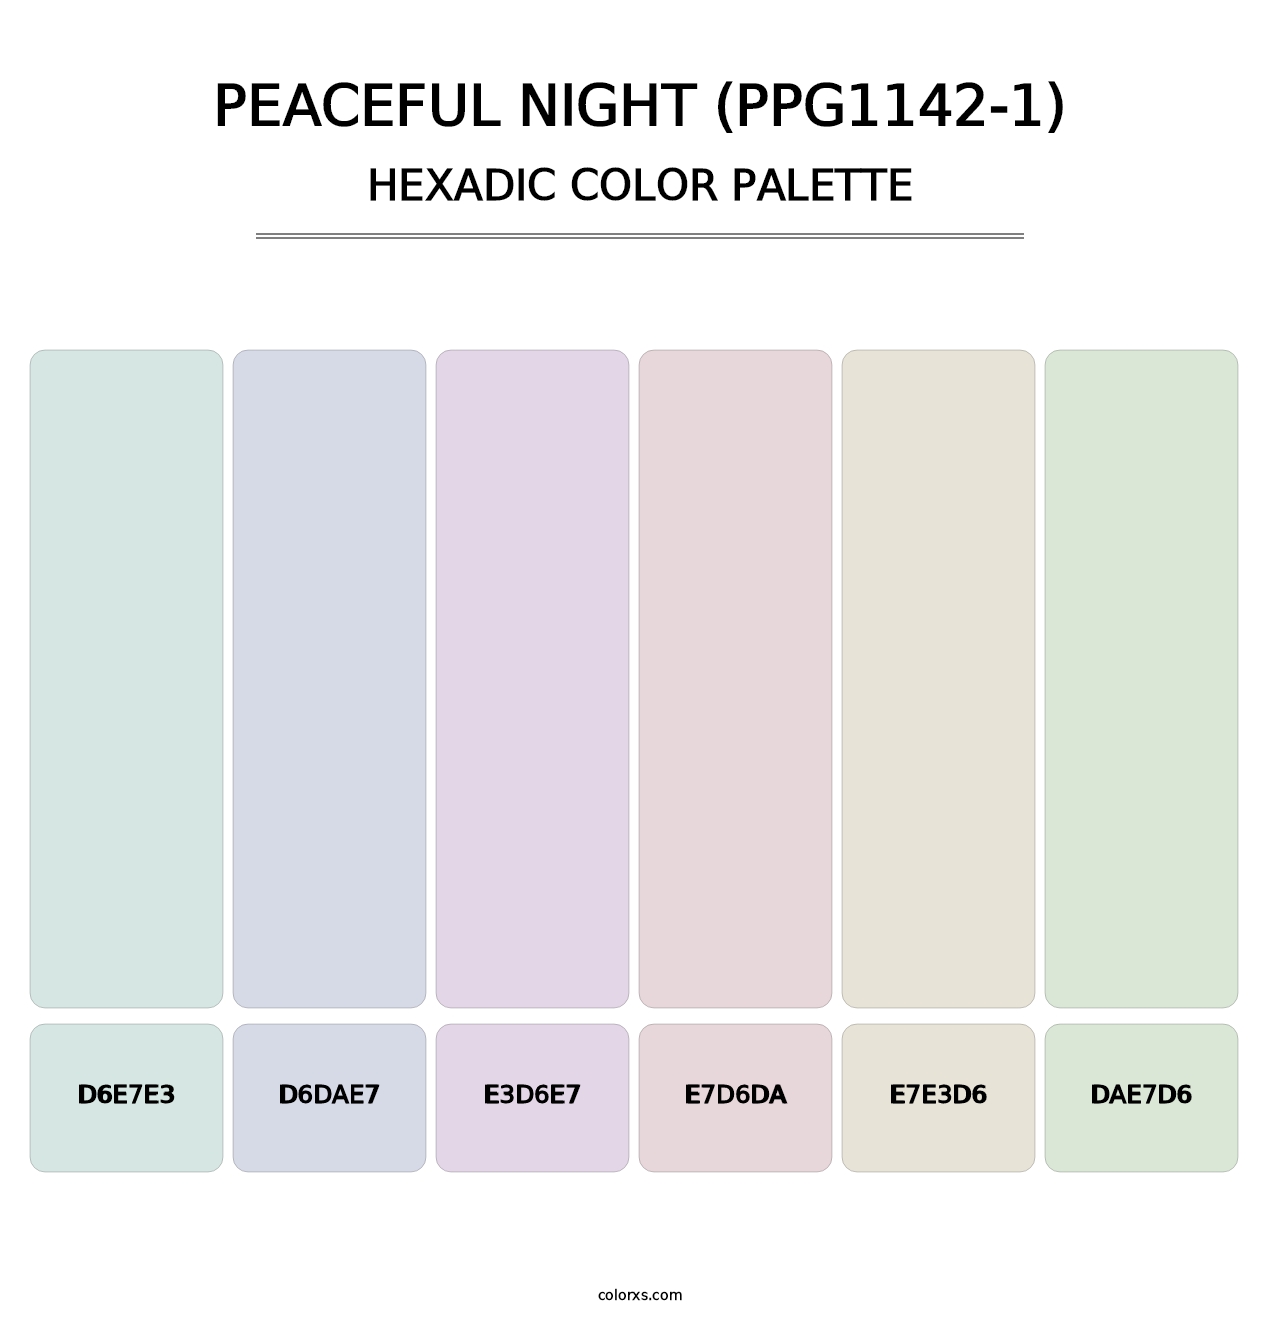 Peaceful Night (PPG1142-1) - Hexadic Color Palette